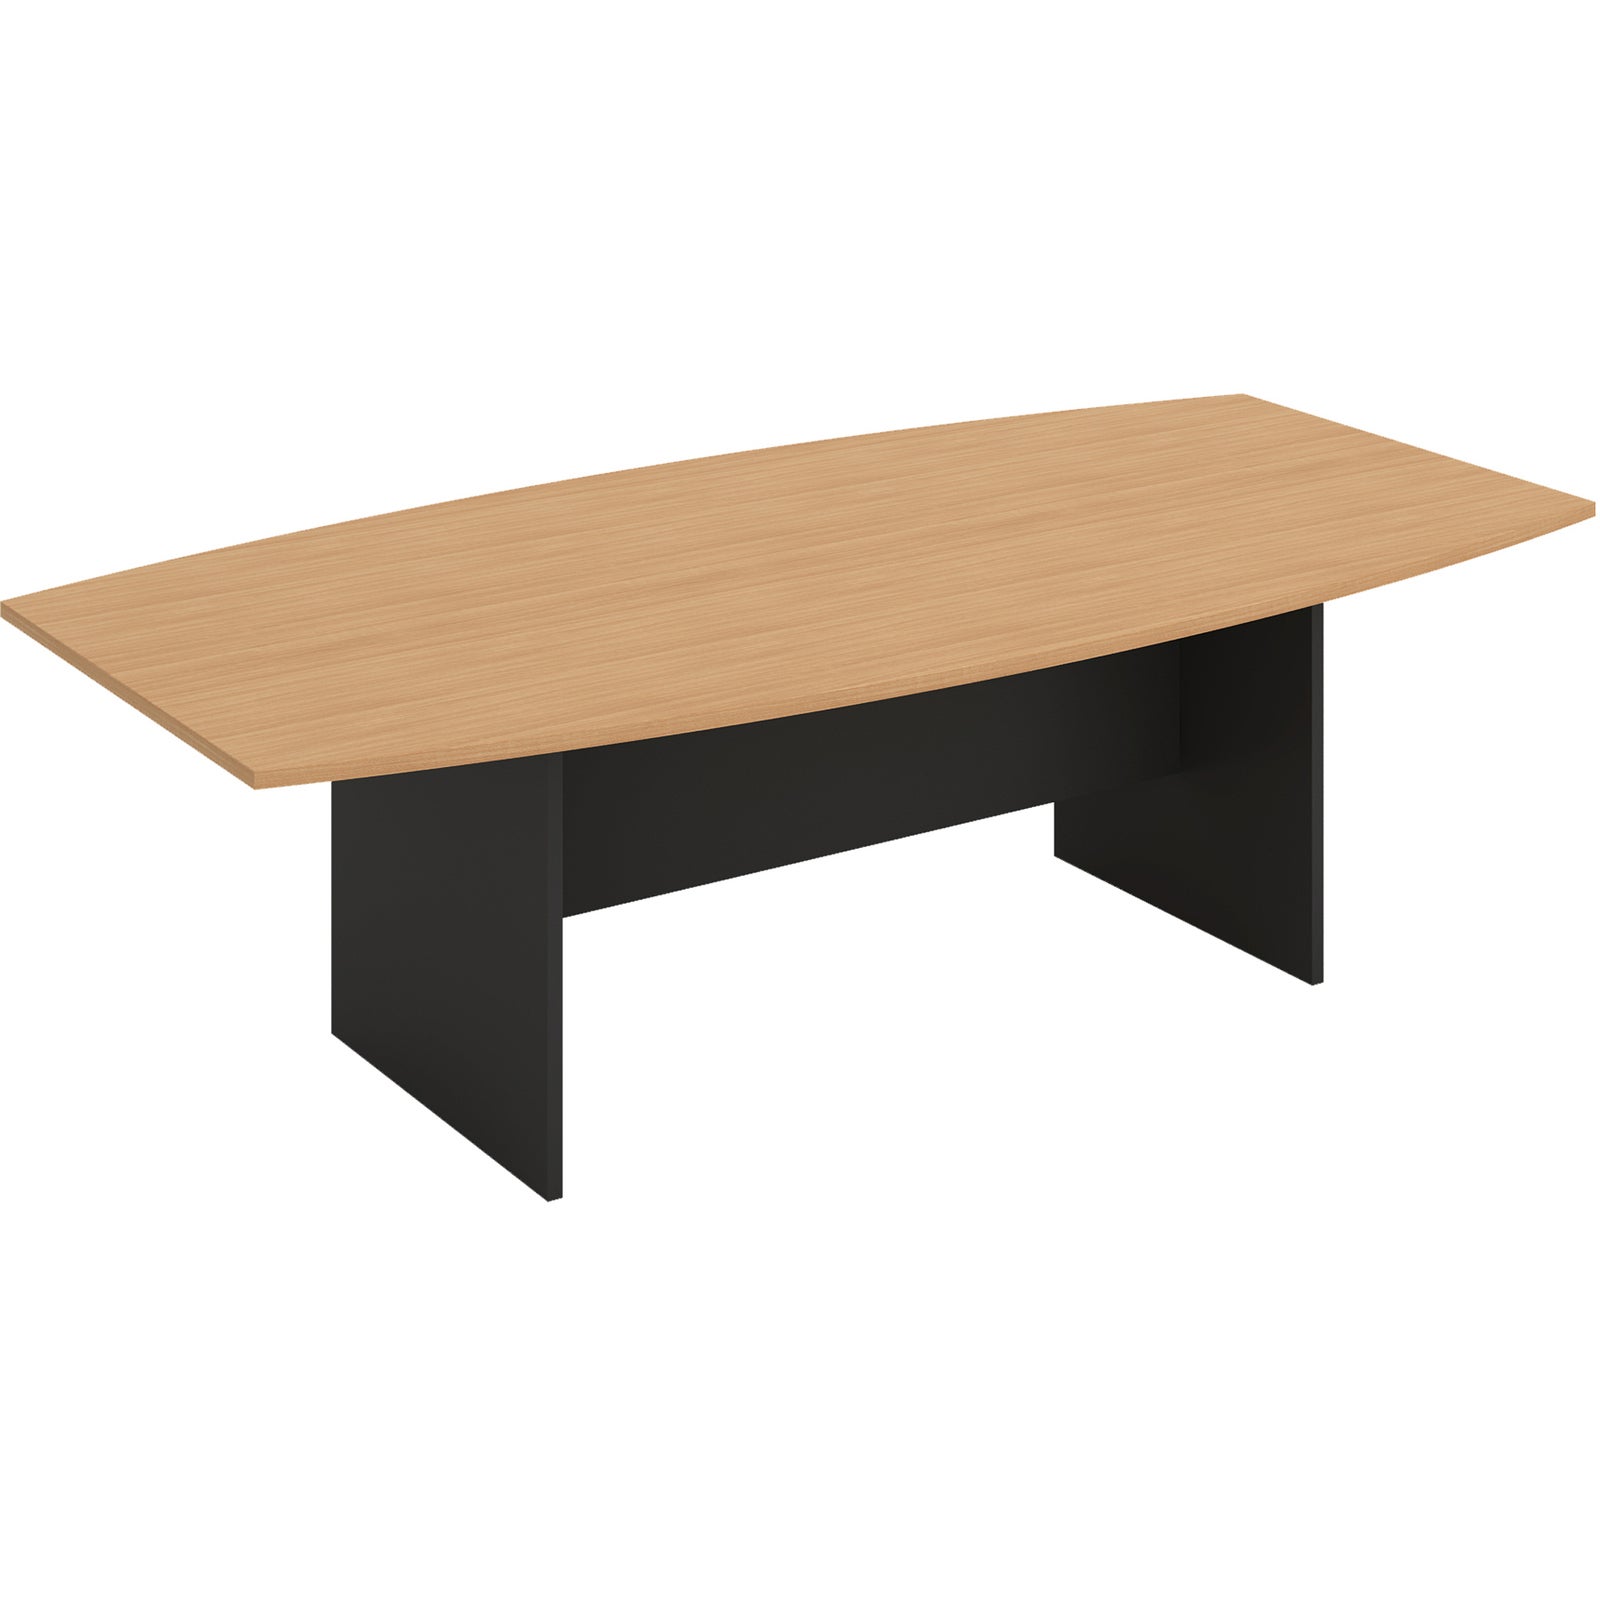 OM BOARDROOM TABLE BASE W2400 x D1200 x H720mm Beech/ Charcoal